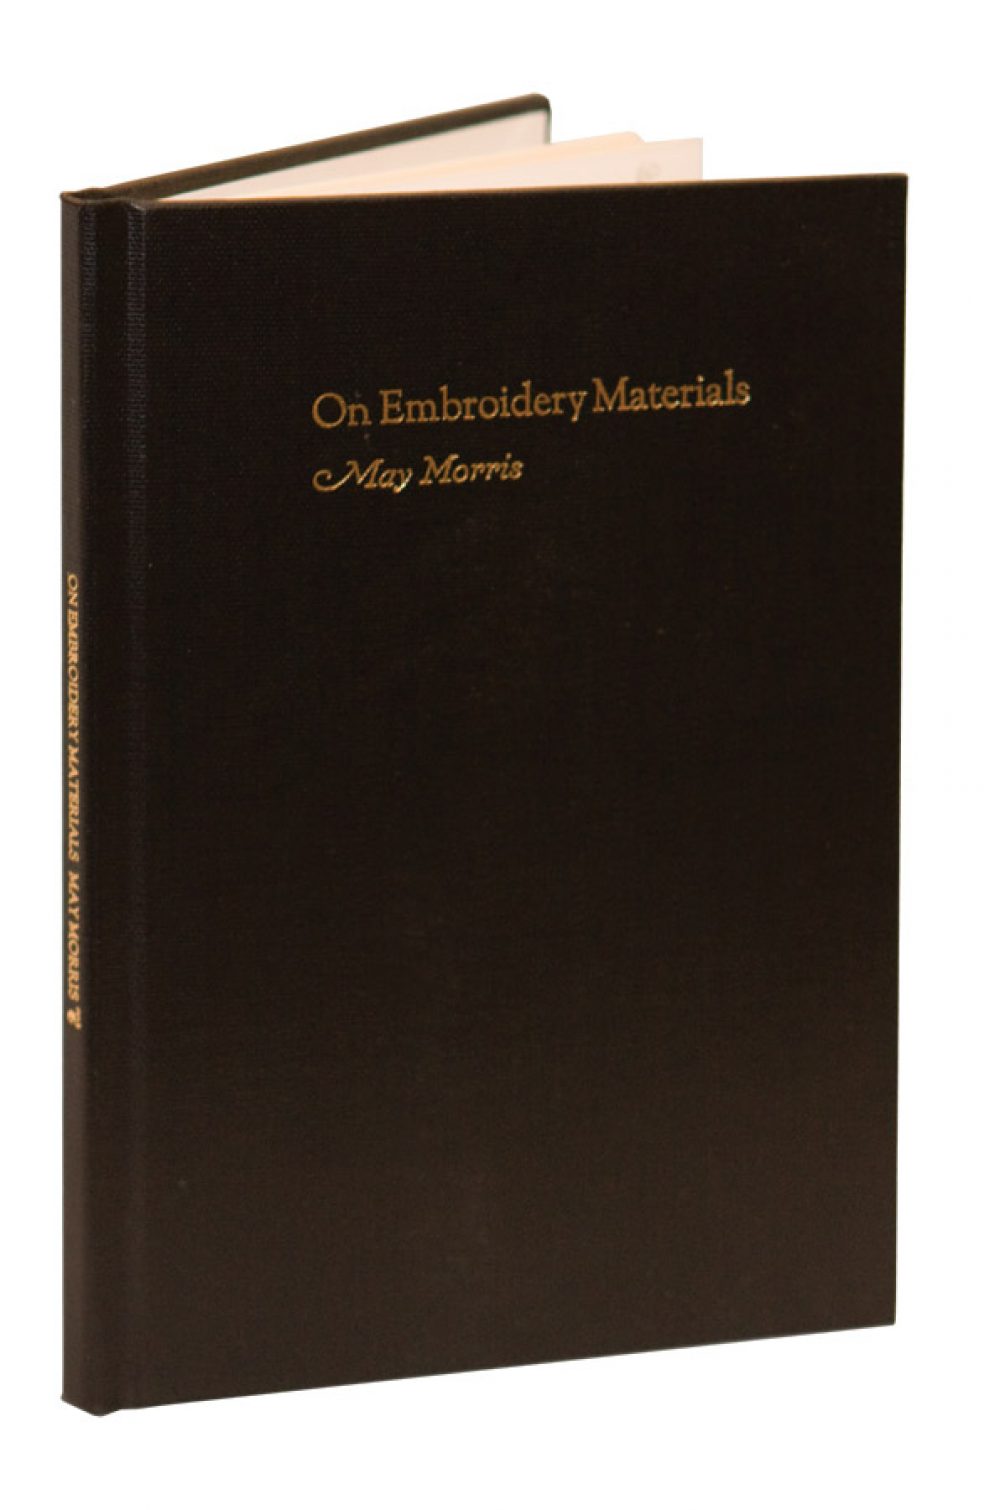 On Embroidery Materials (Hardcover) by May Morris